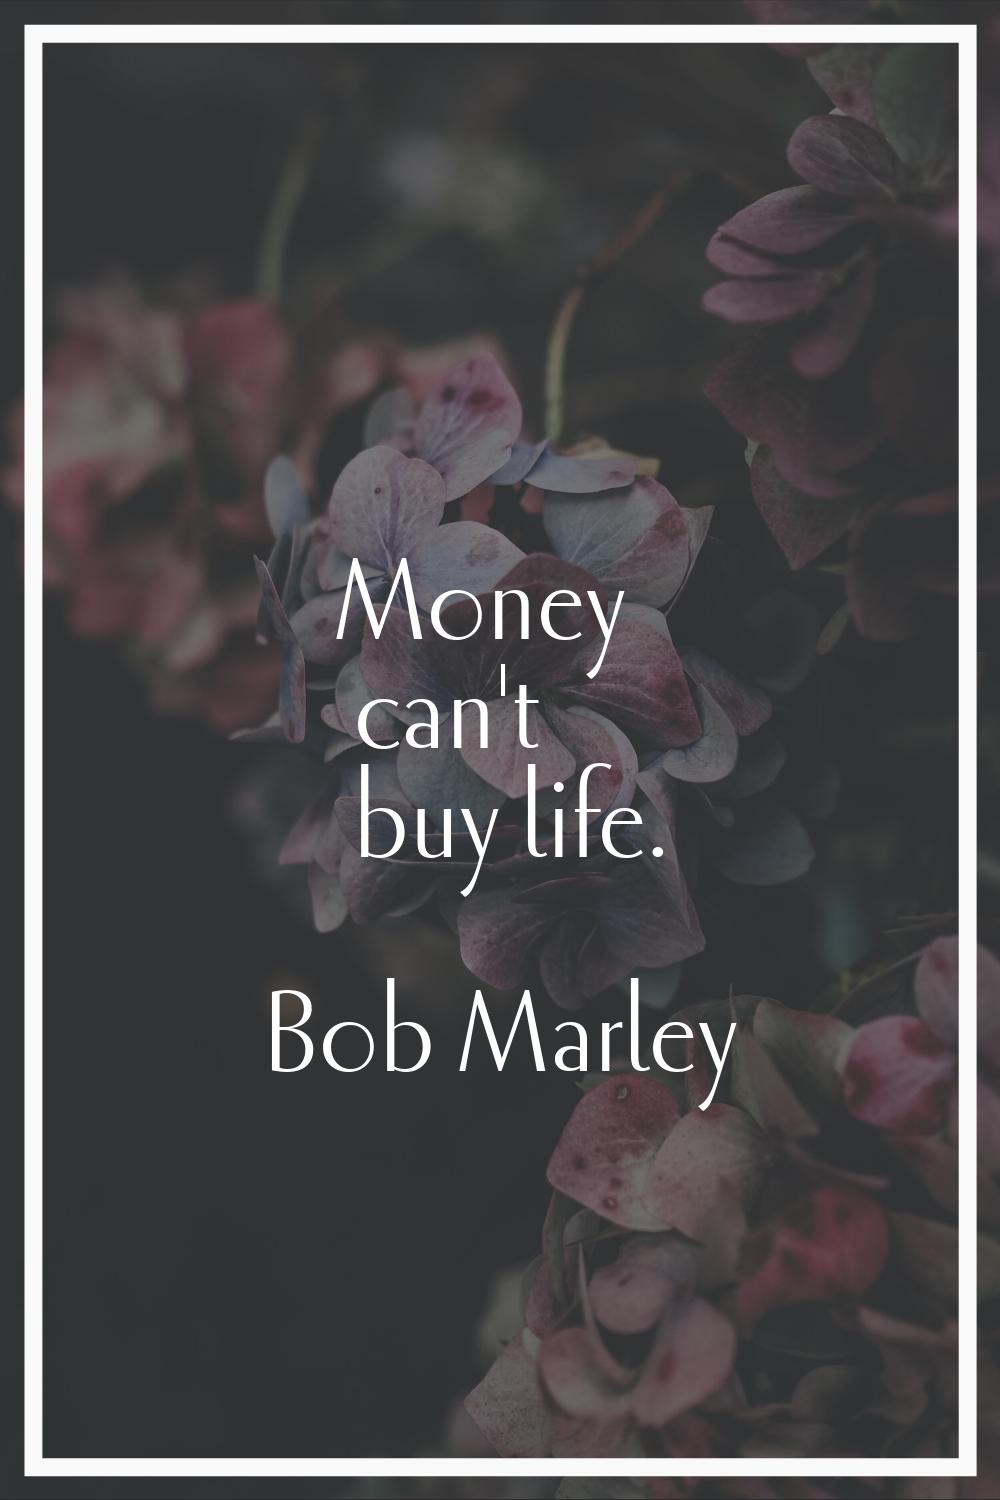 Money can't buy life.